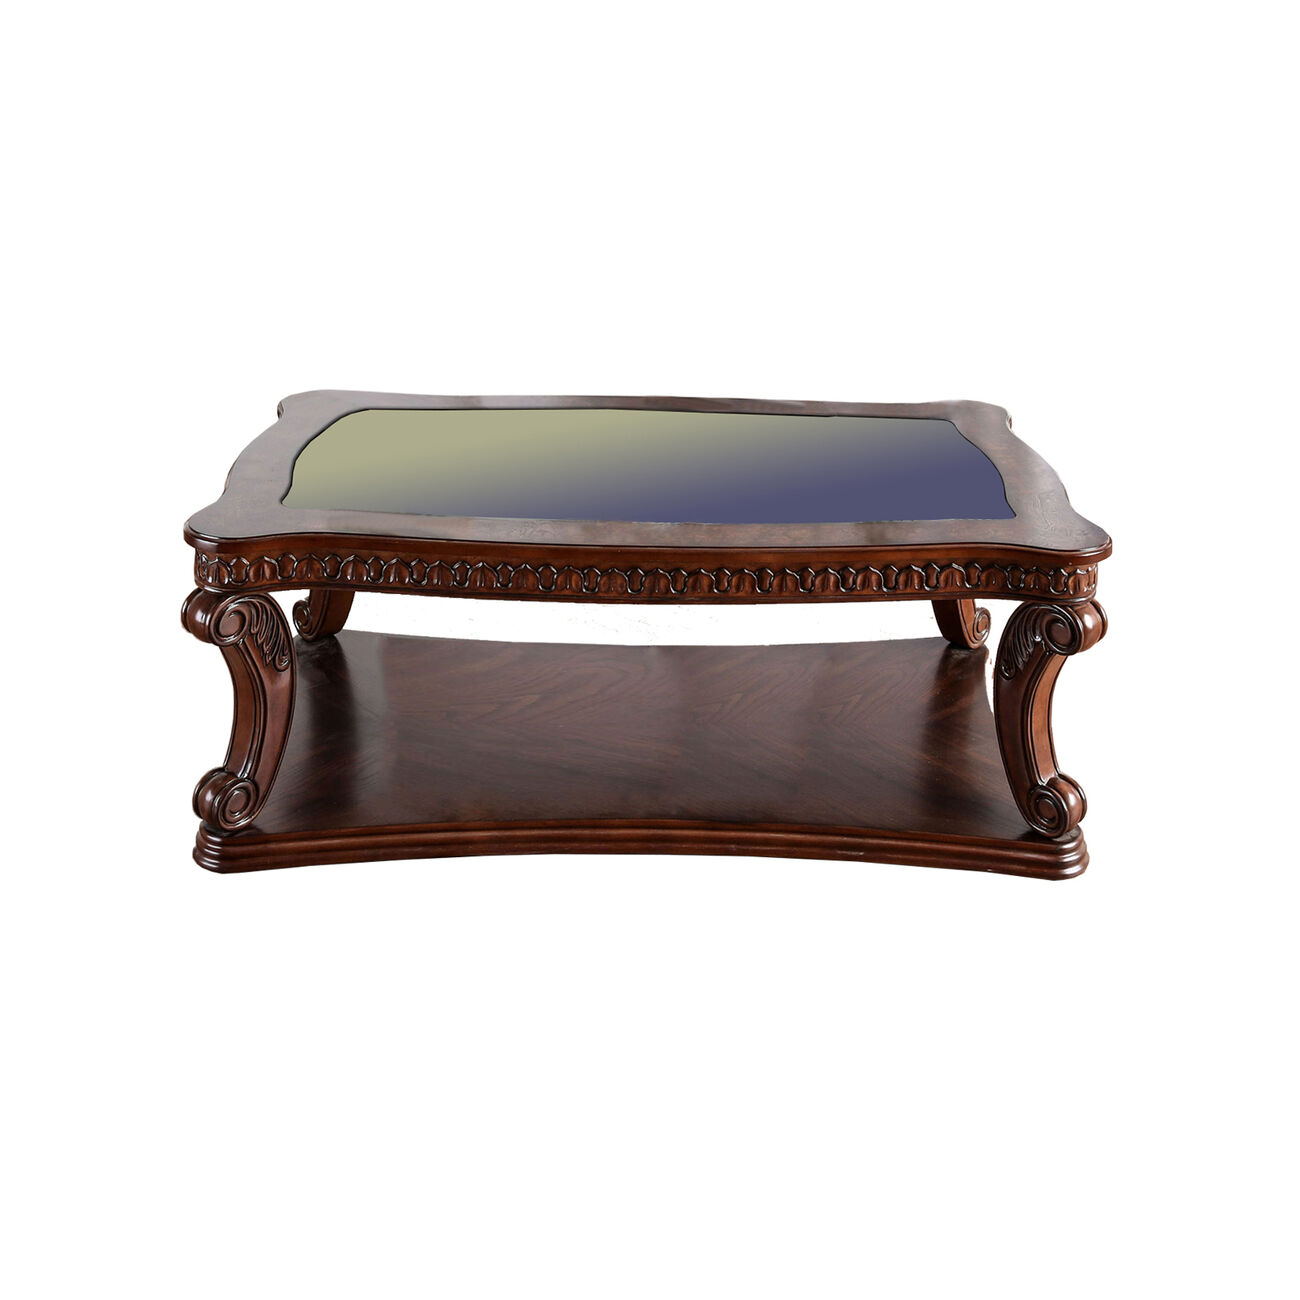 Traditional Coffee Table with Cabriole Legs and Wooden Carving, Brown